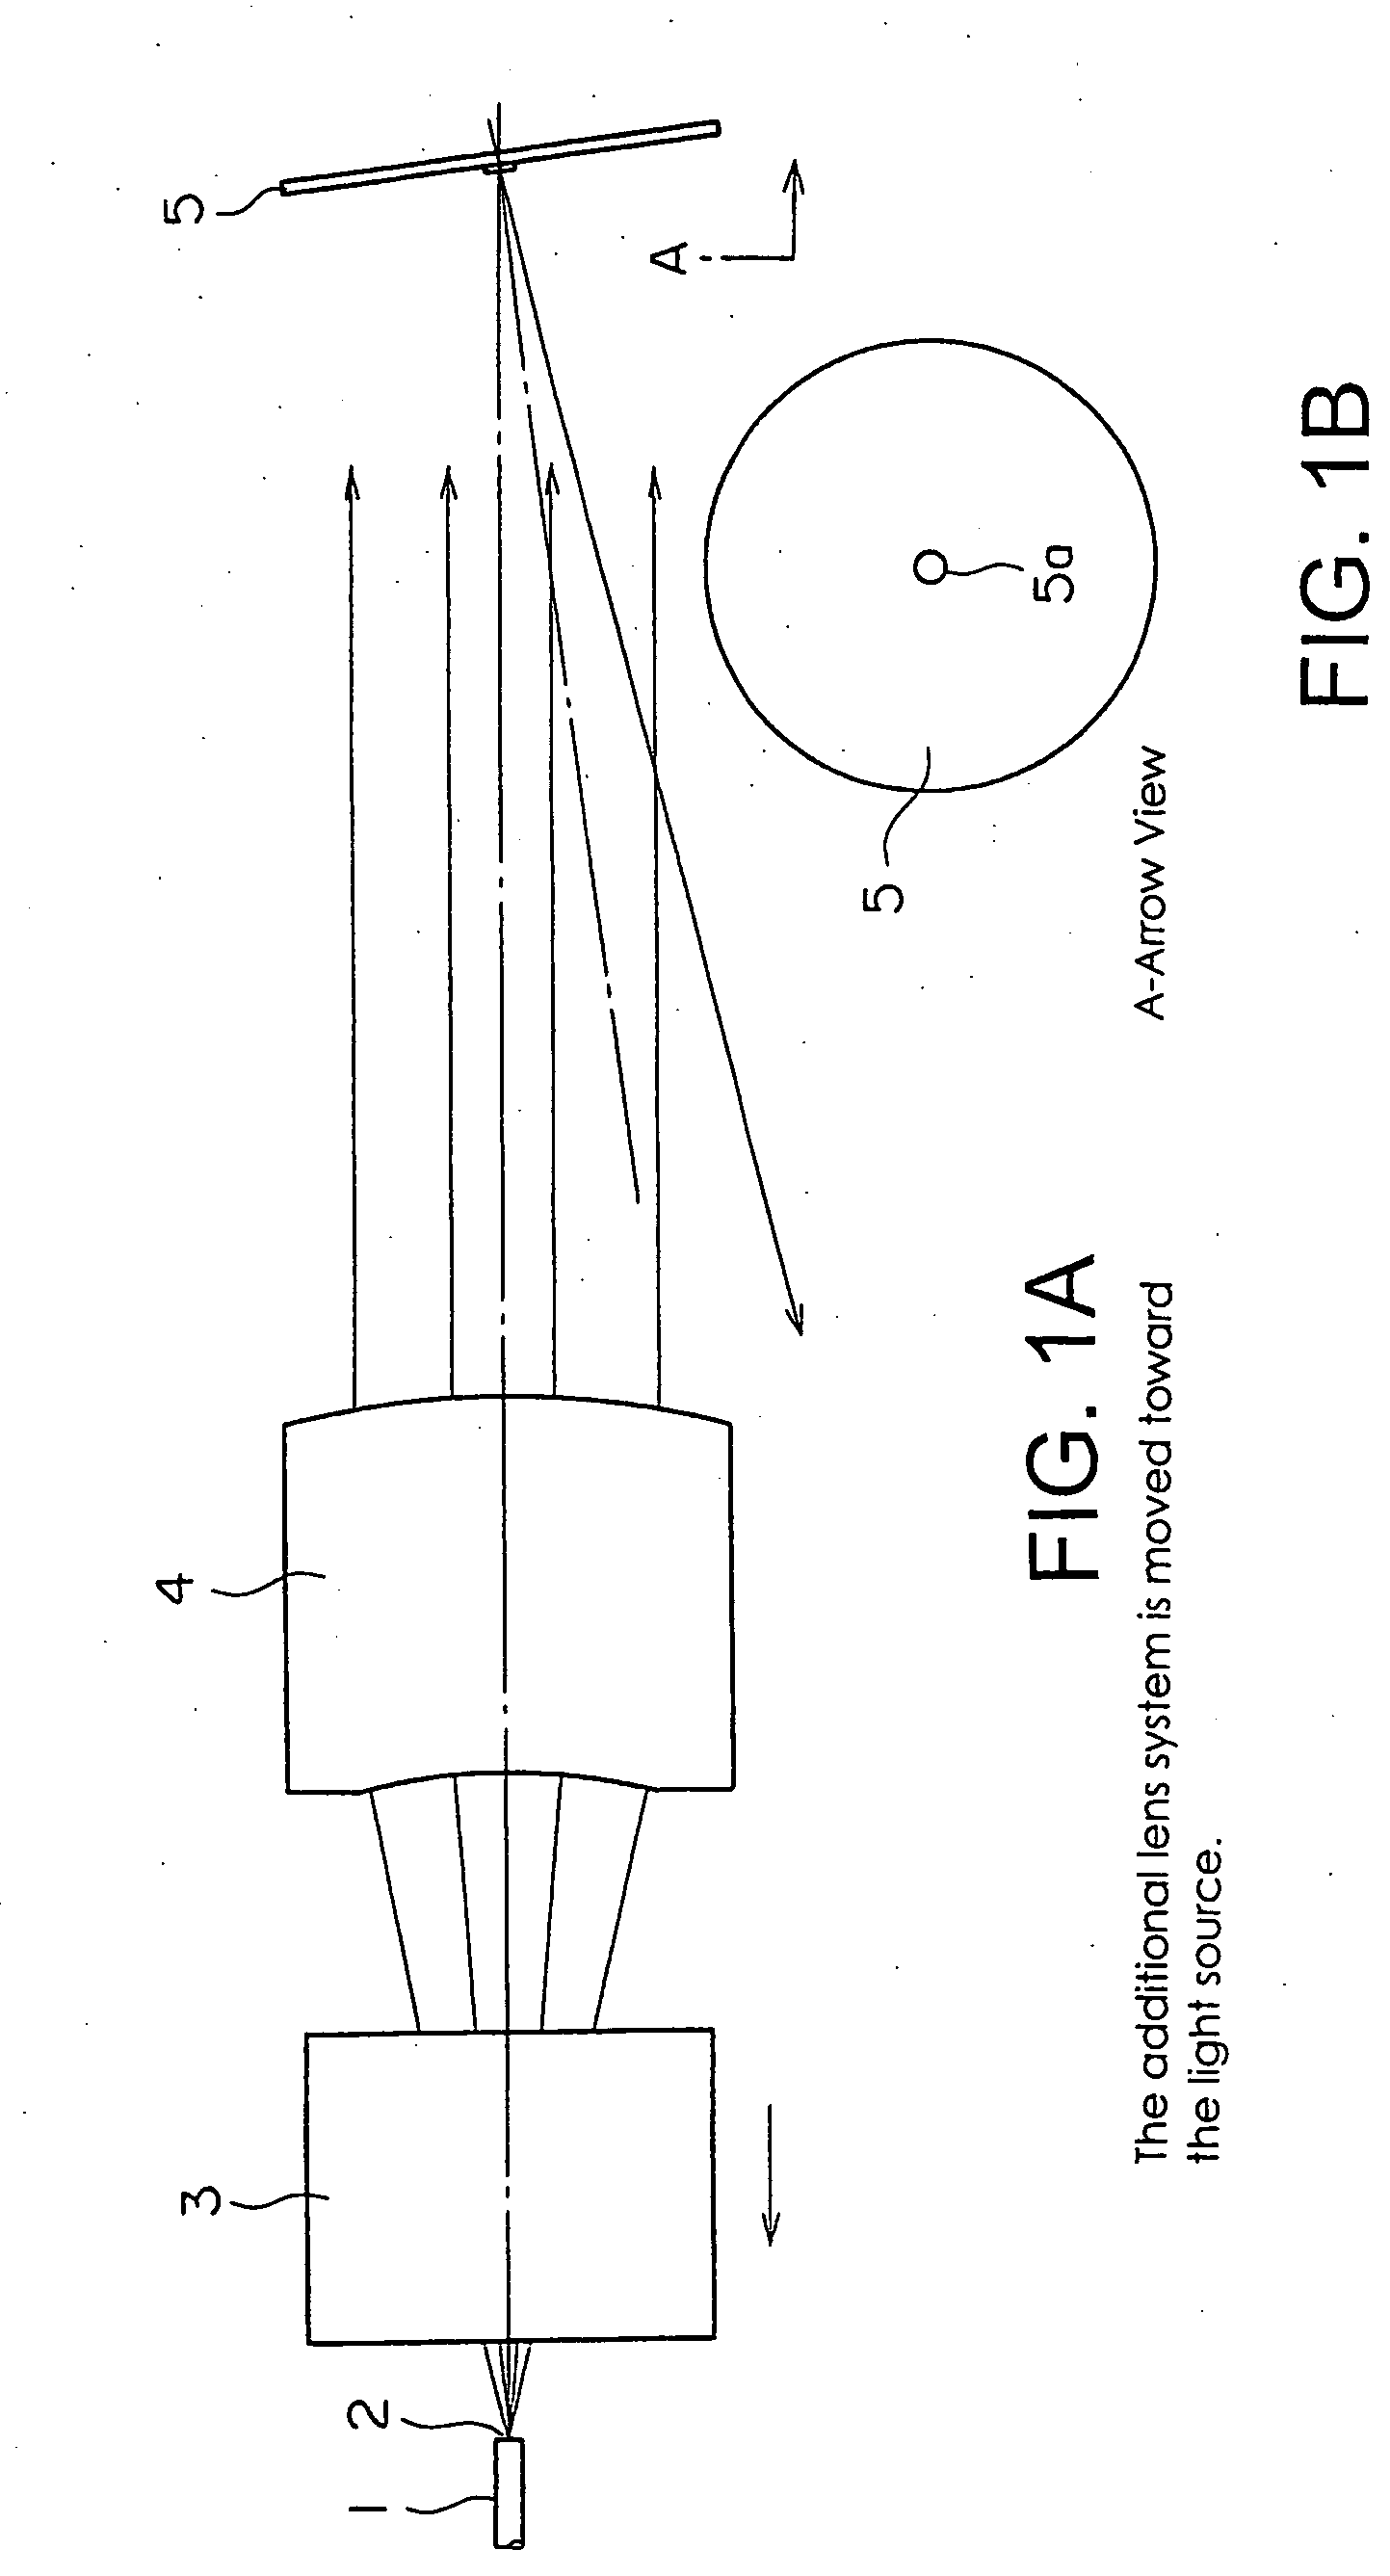 Optical system for reinforcing optical tweezers capturing force